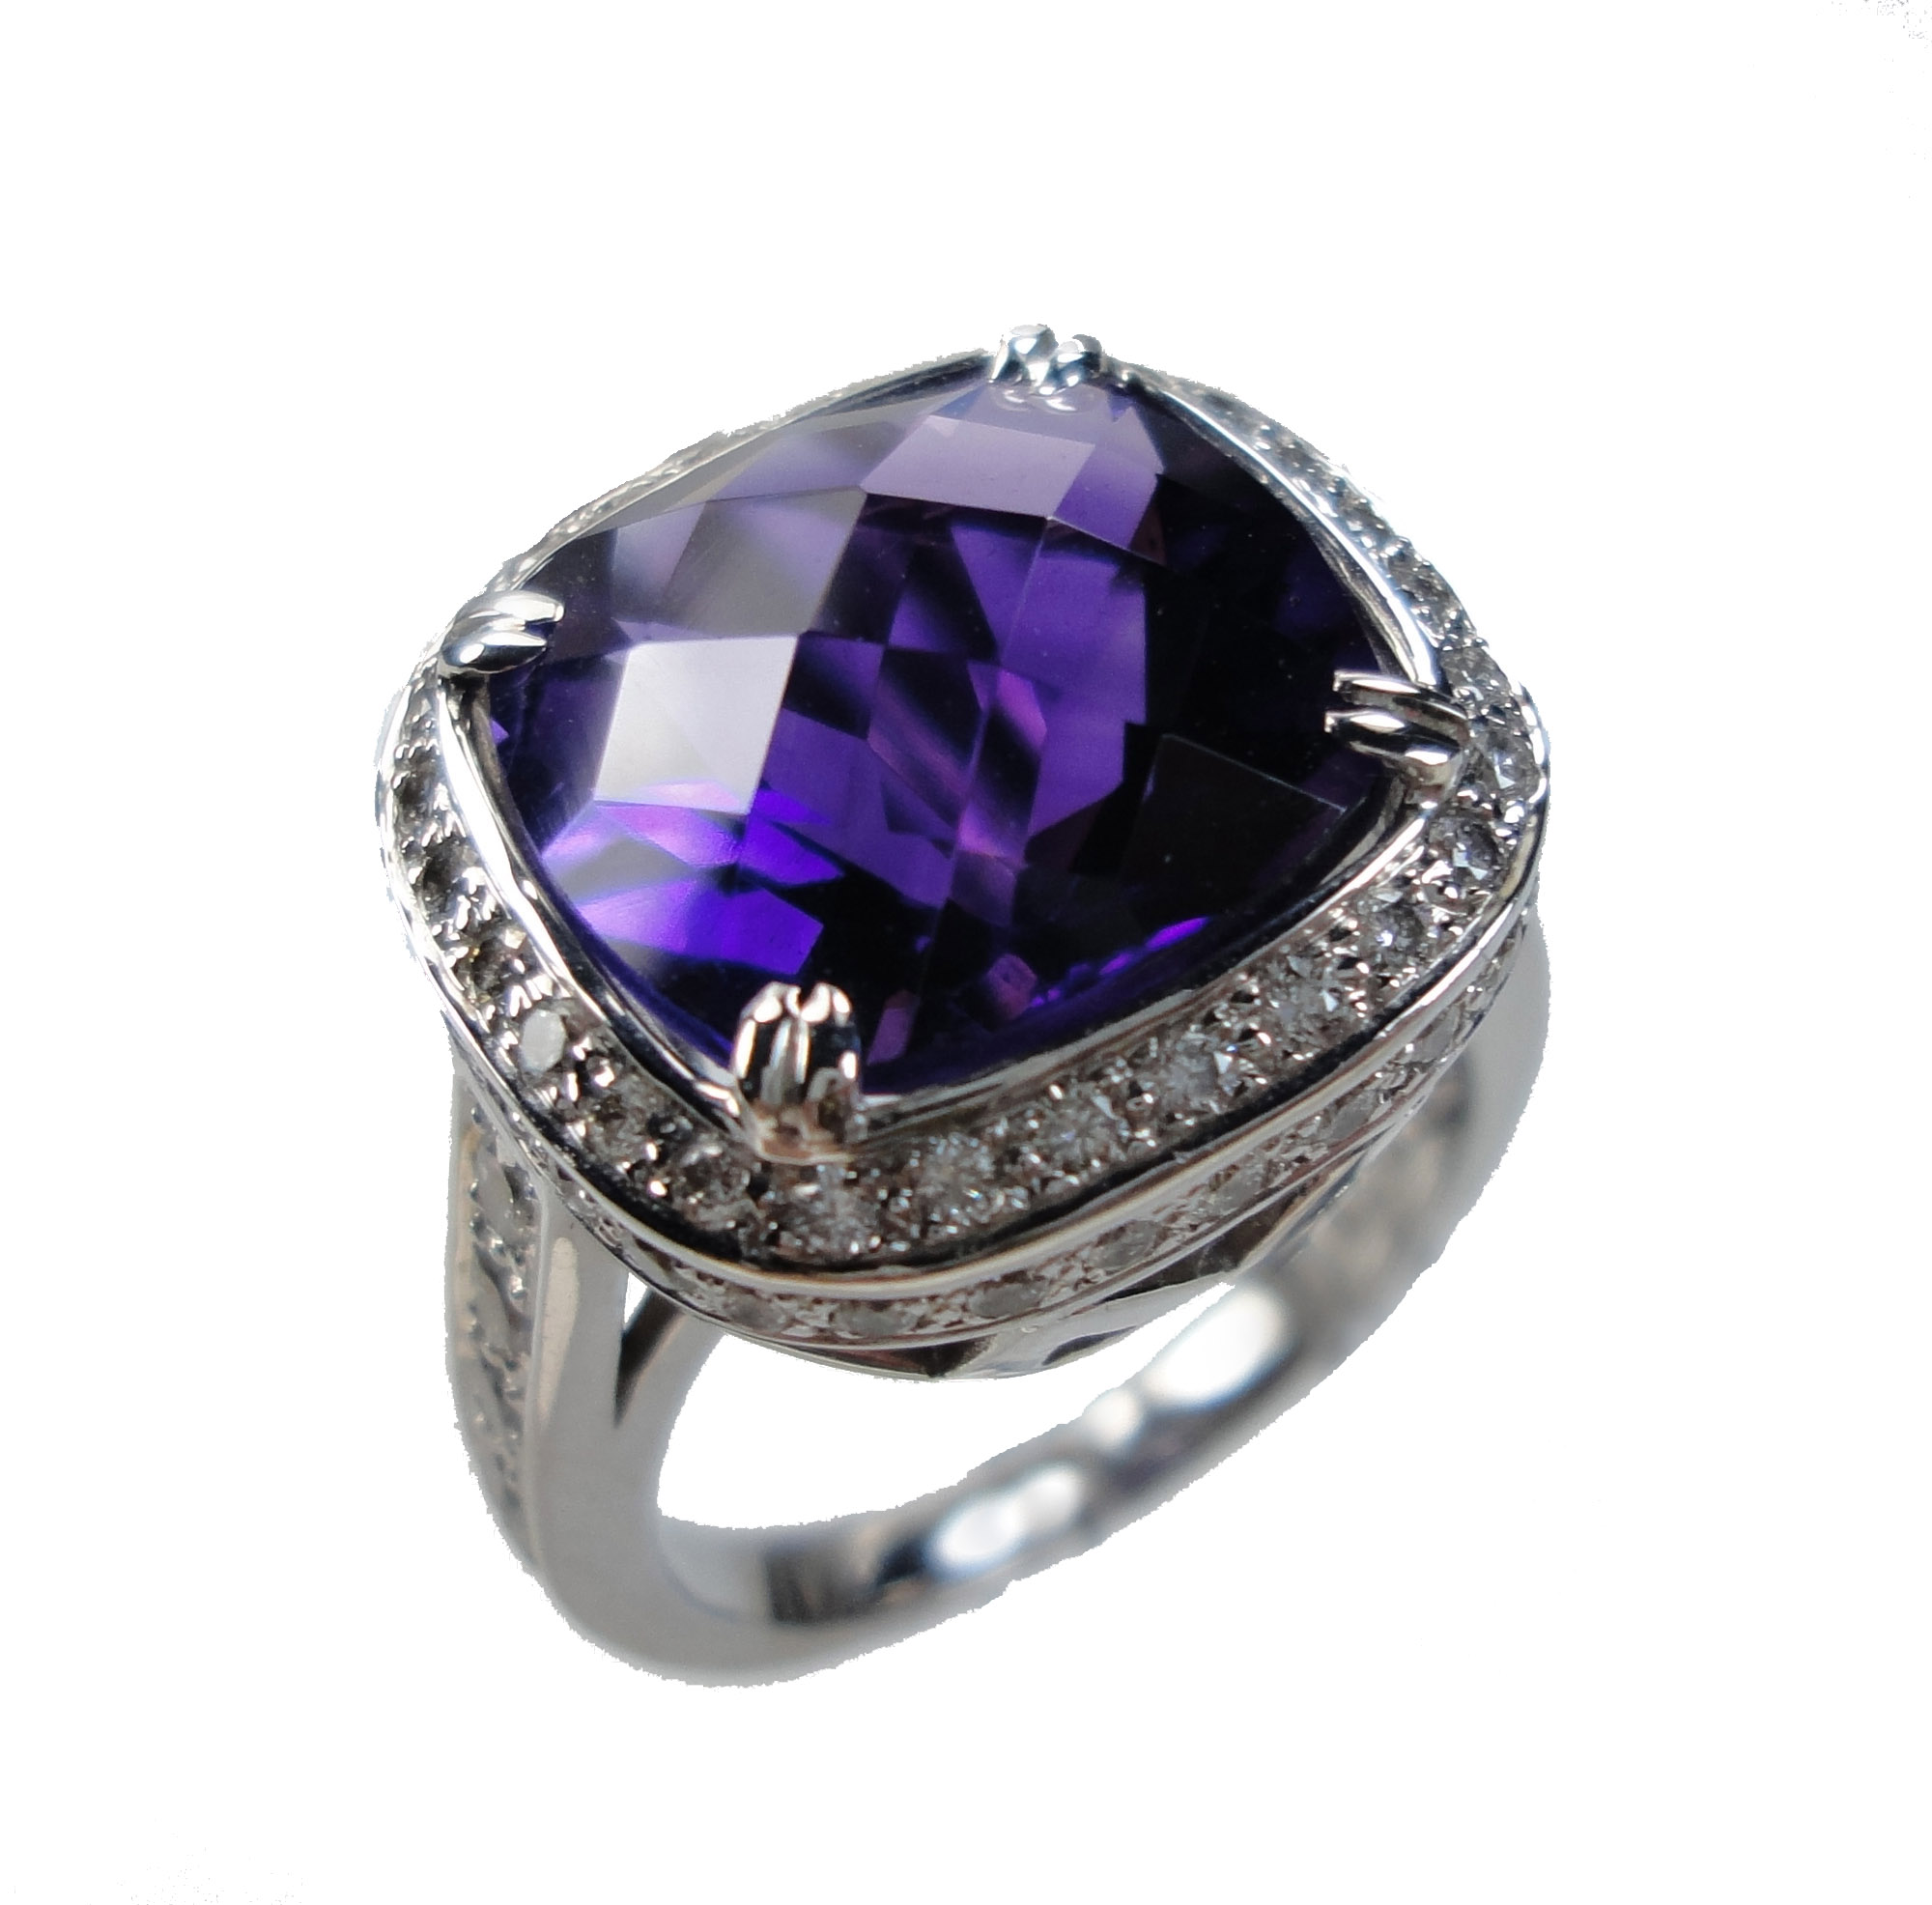 Semi precious ring available at Luxe Jewellery